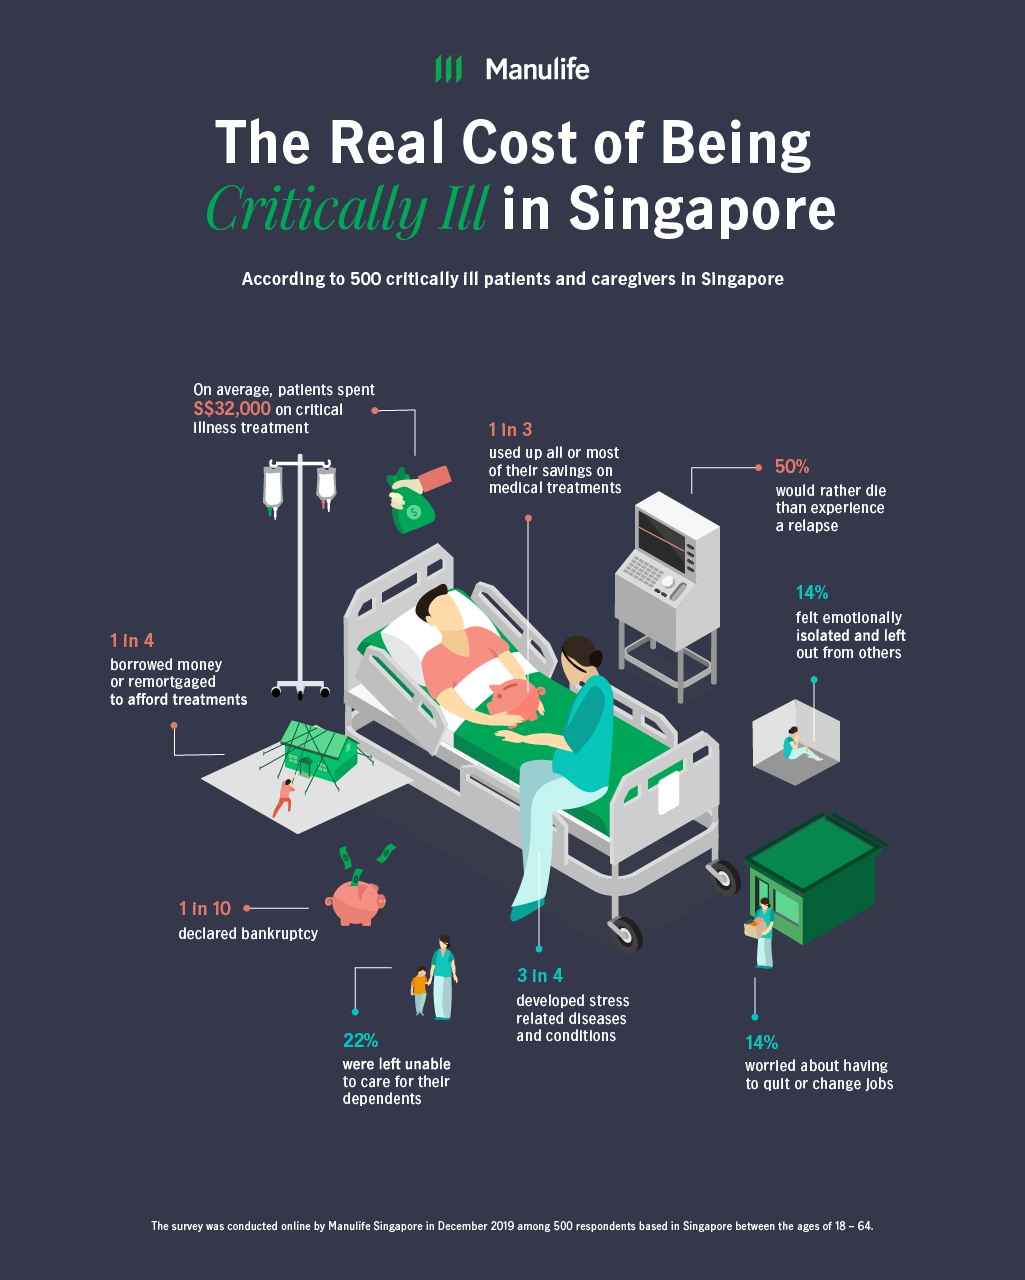 the real cost of being critically ill in Singapore